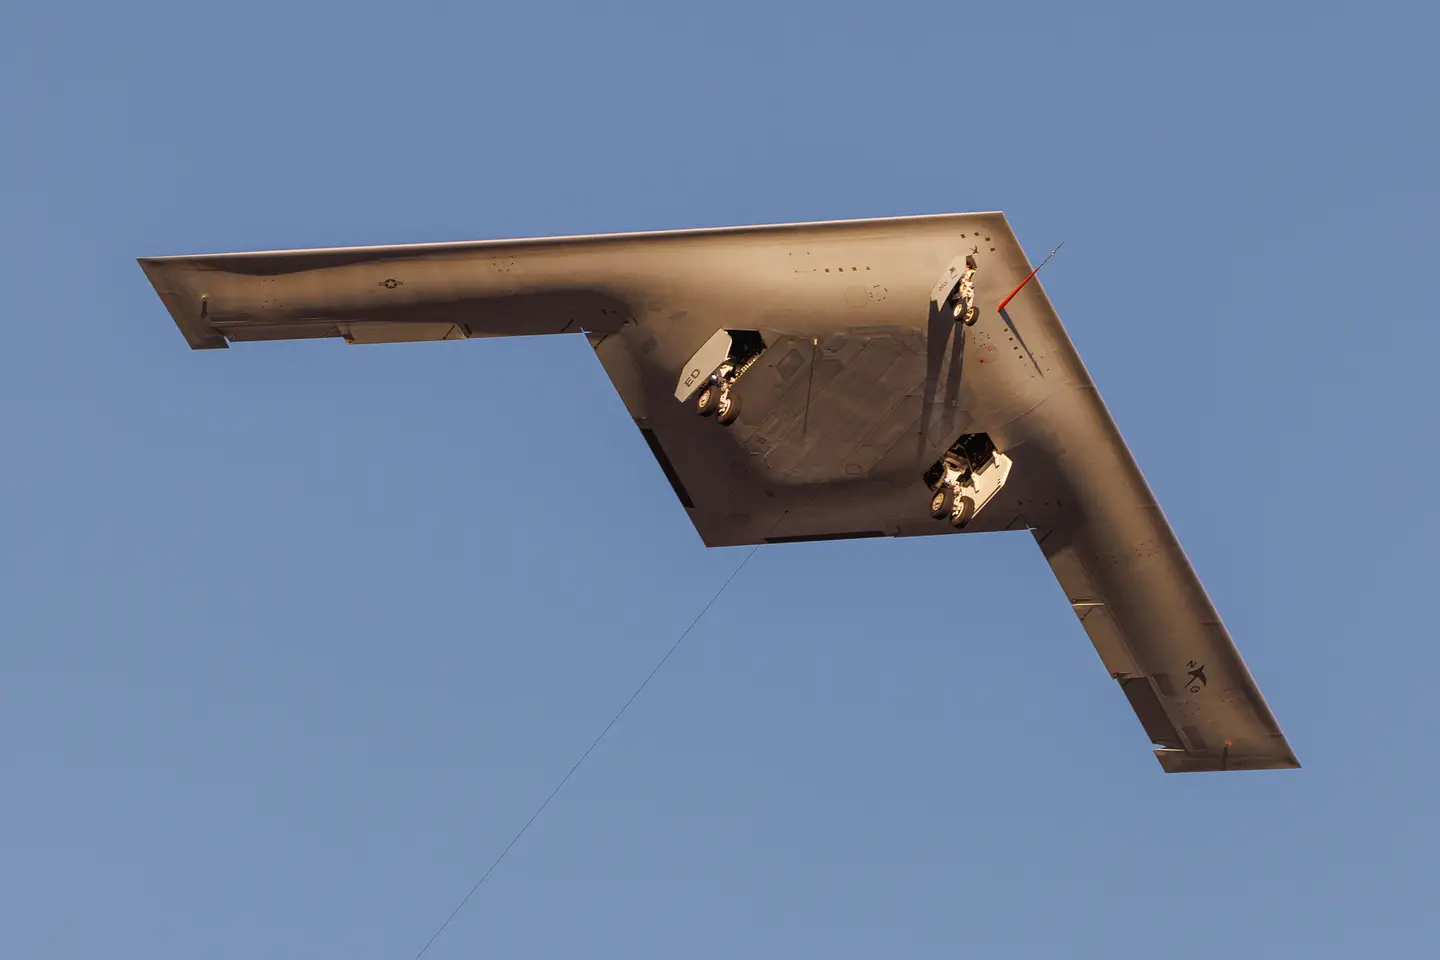 The B-21 Raider nuclear bomber is able to begin full flight testing at Edwards Air Force Base, US Air Force base